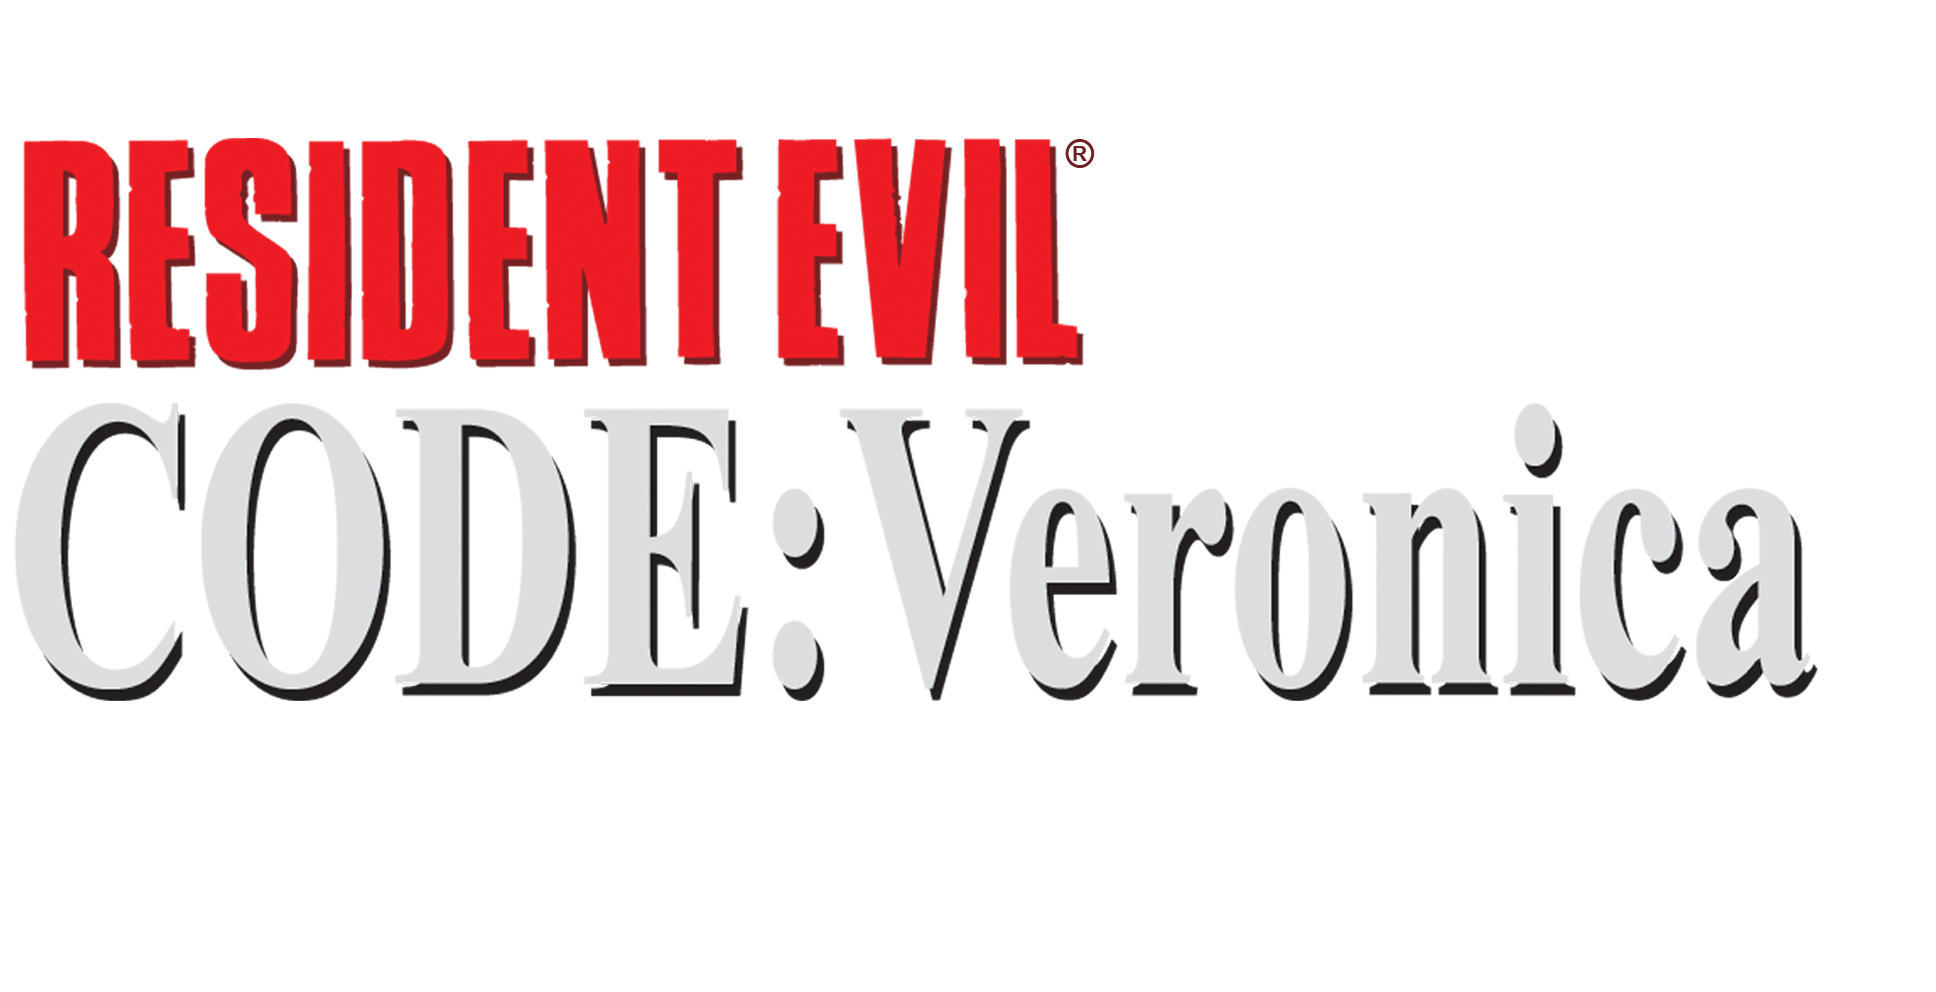 Resident Evil Code: Veronica X HD Picture - Image Abyss